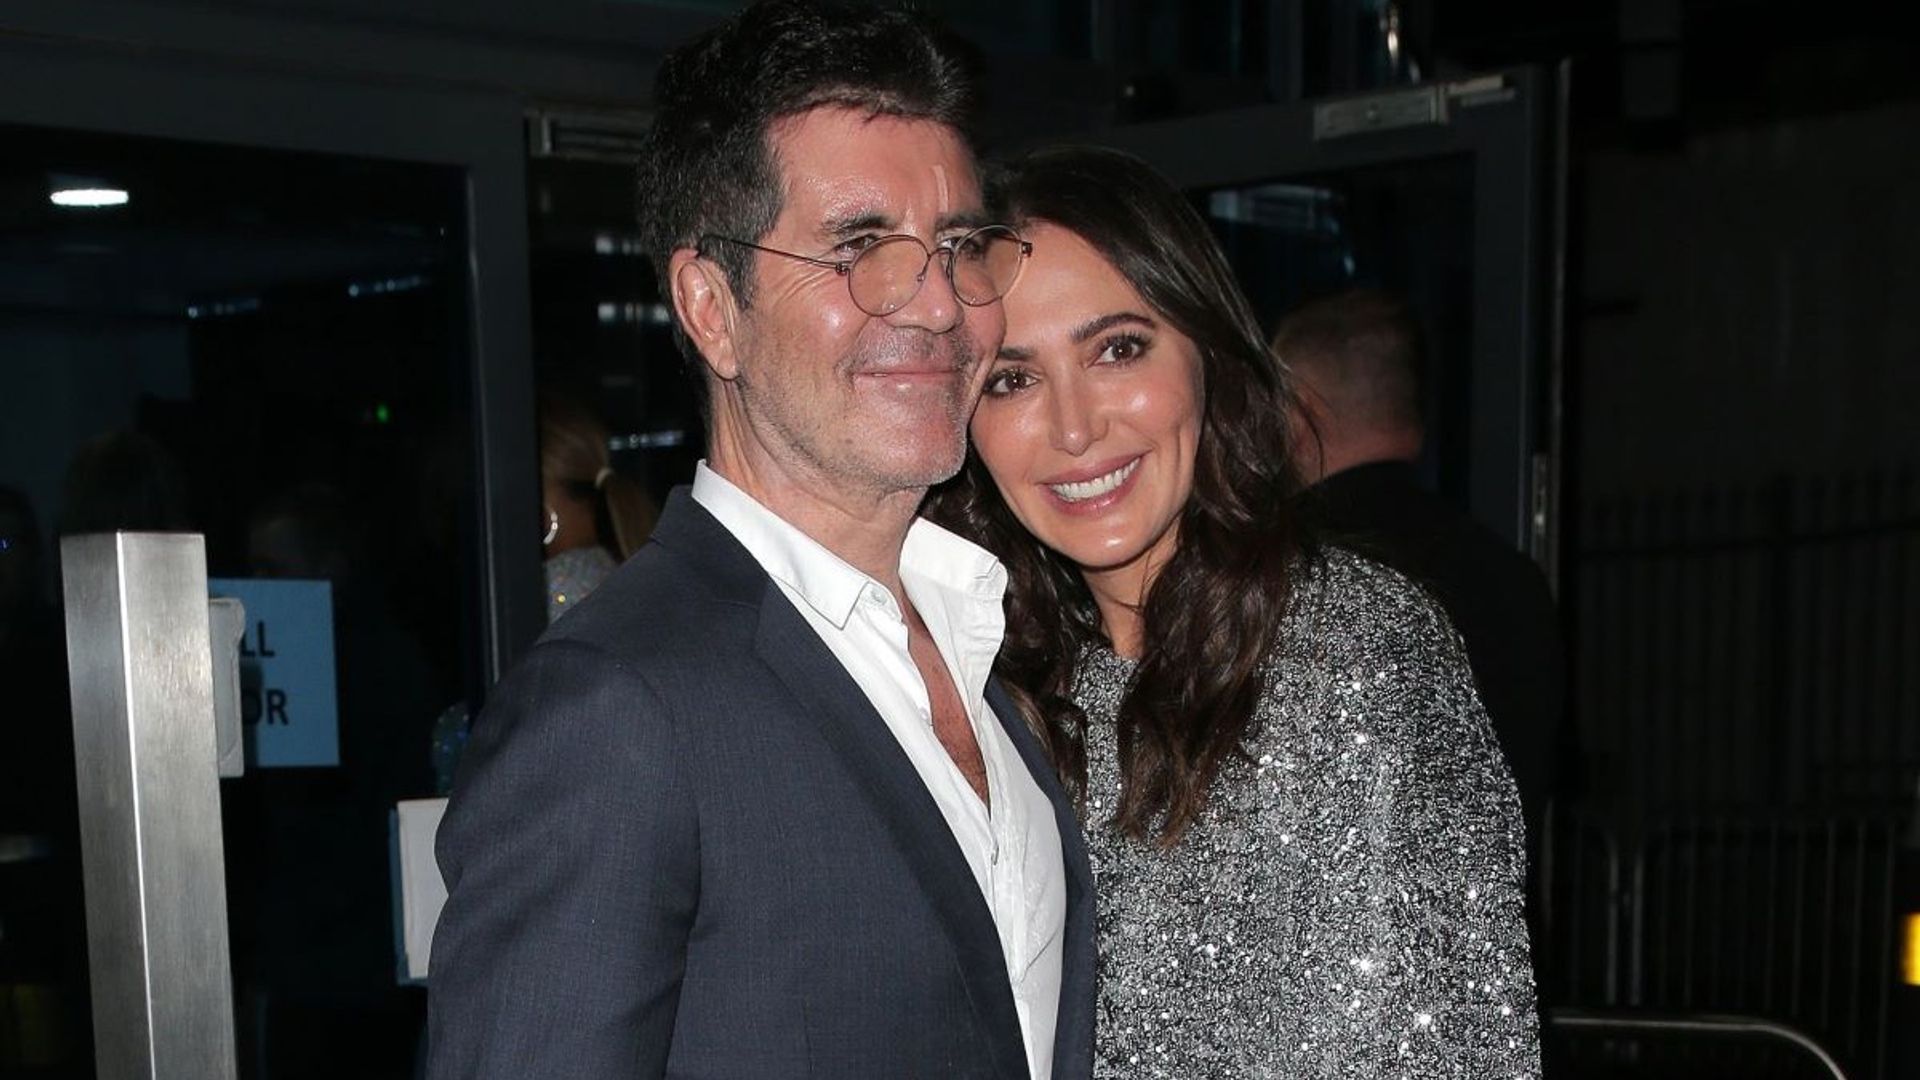 Simon Cowell's multi-million dollar engagement ring for Lauren Silverman is a total show-stopper